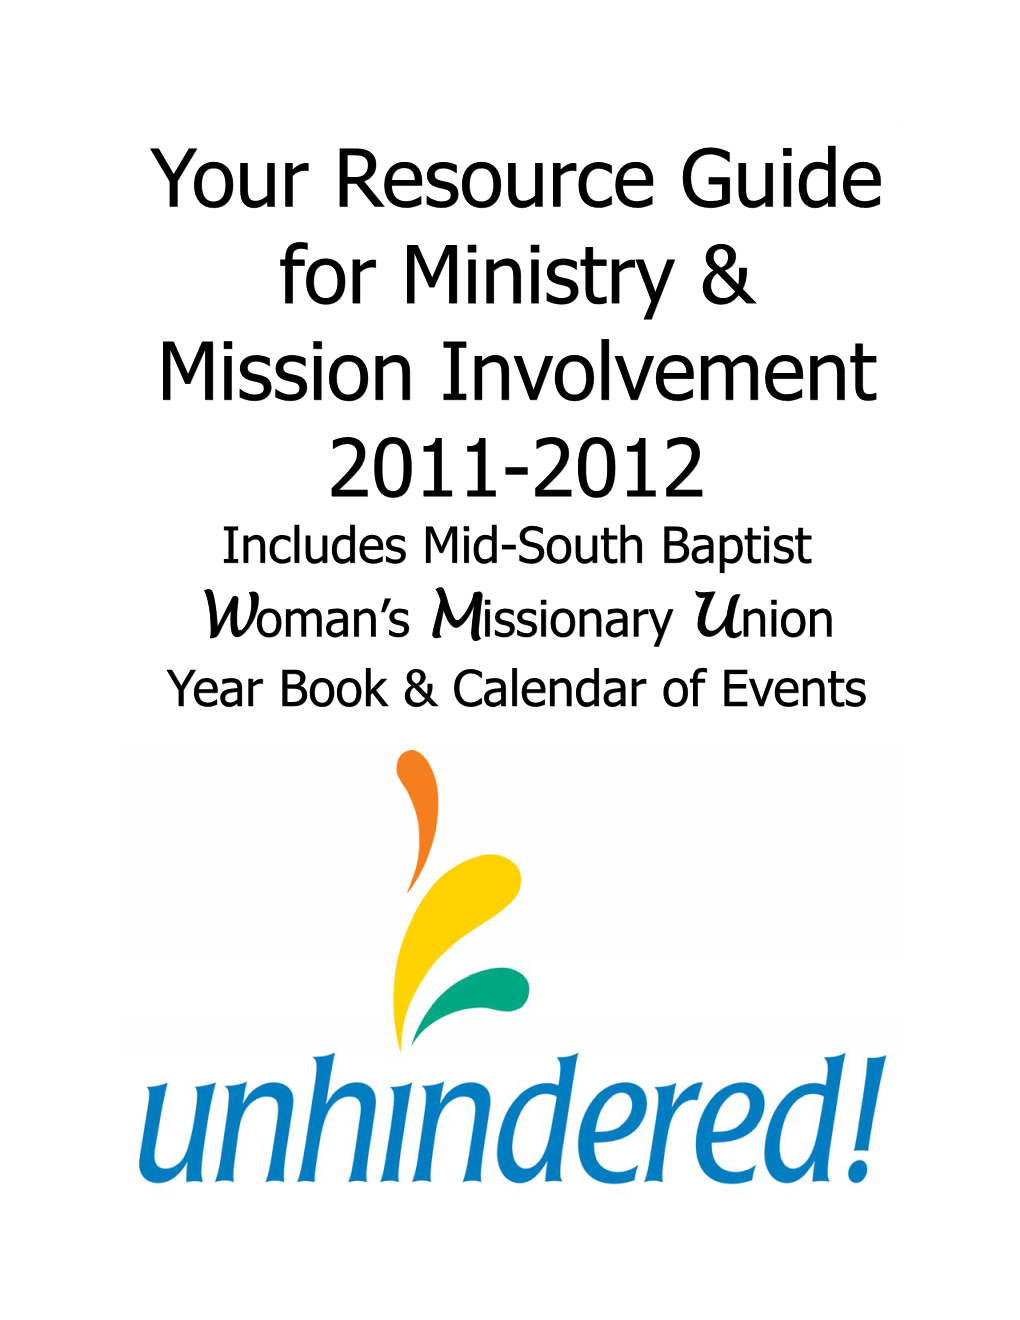 Your Resource Guide for Ministry & Mission Involvement 2011-2012